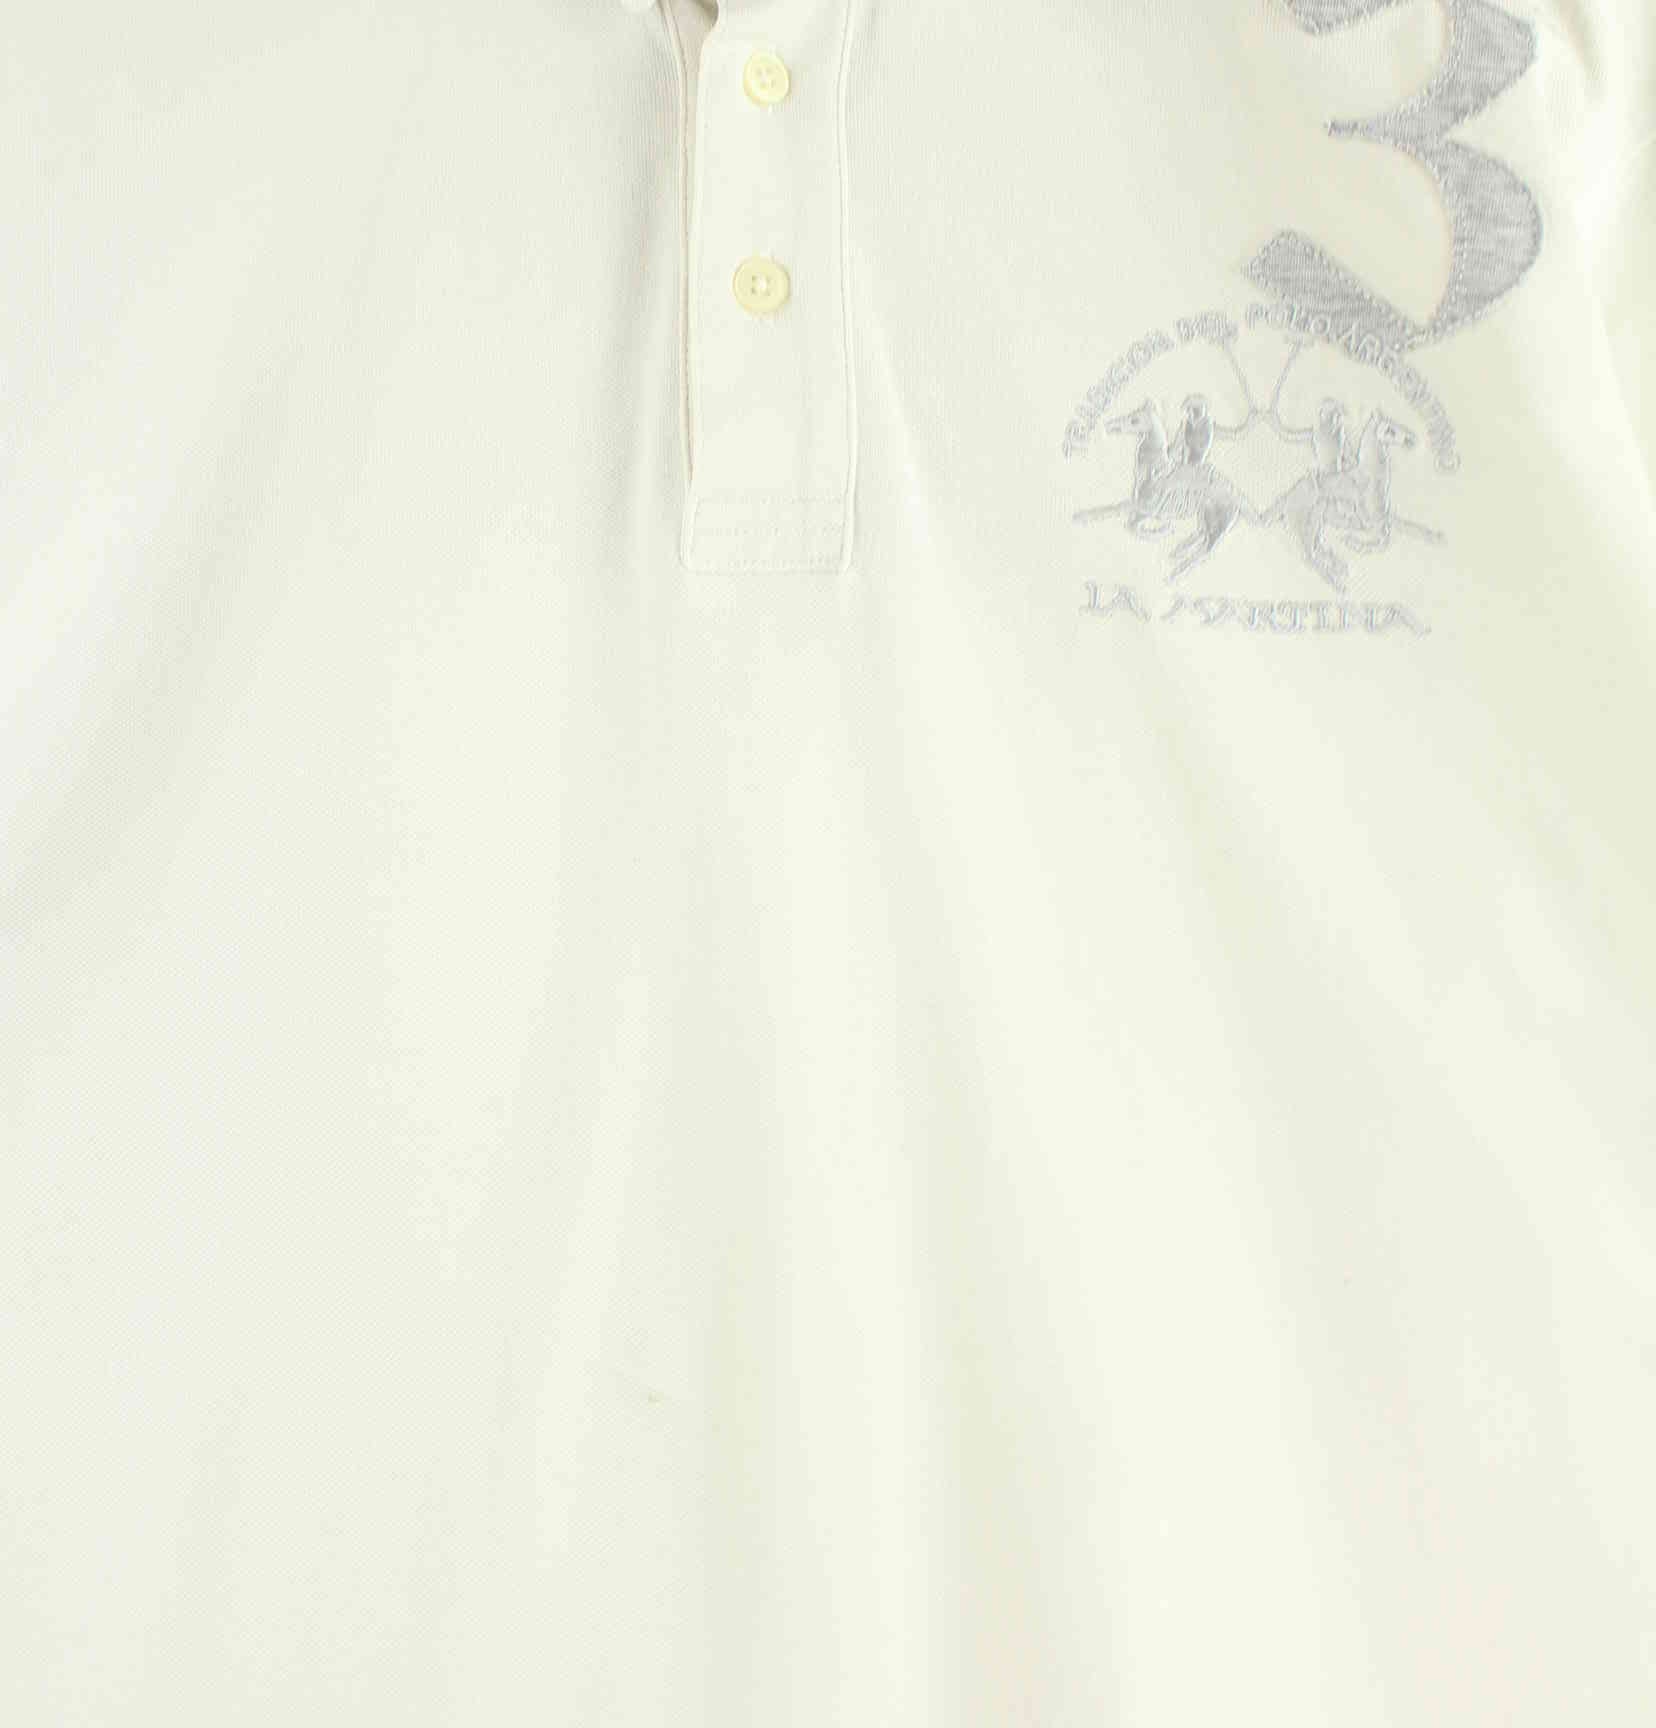 La Martina Embroidered Polo Weiß L (detail image 1)